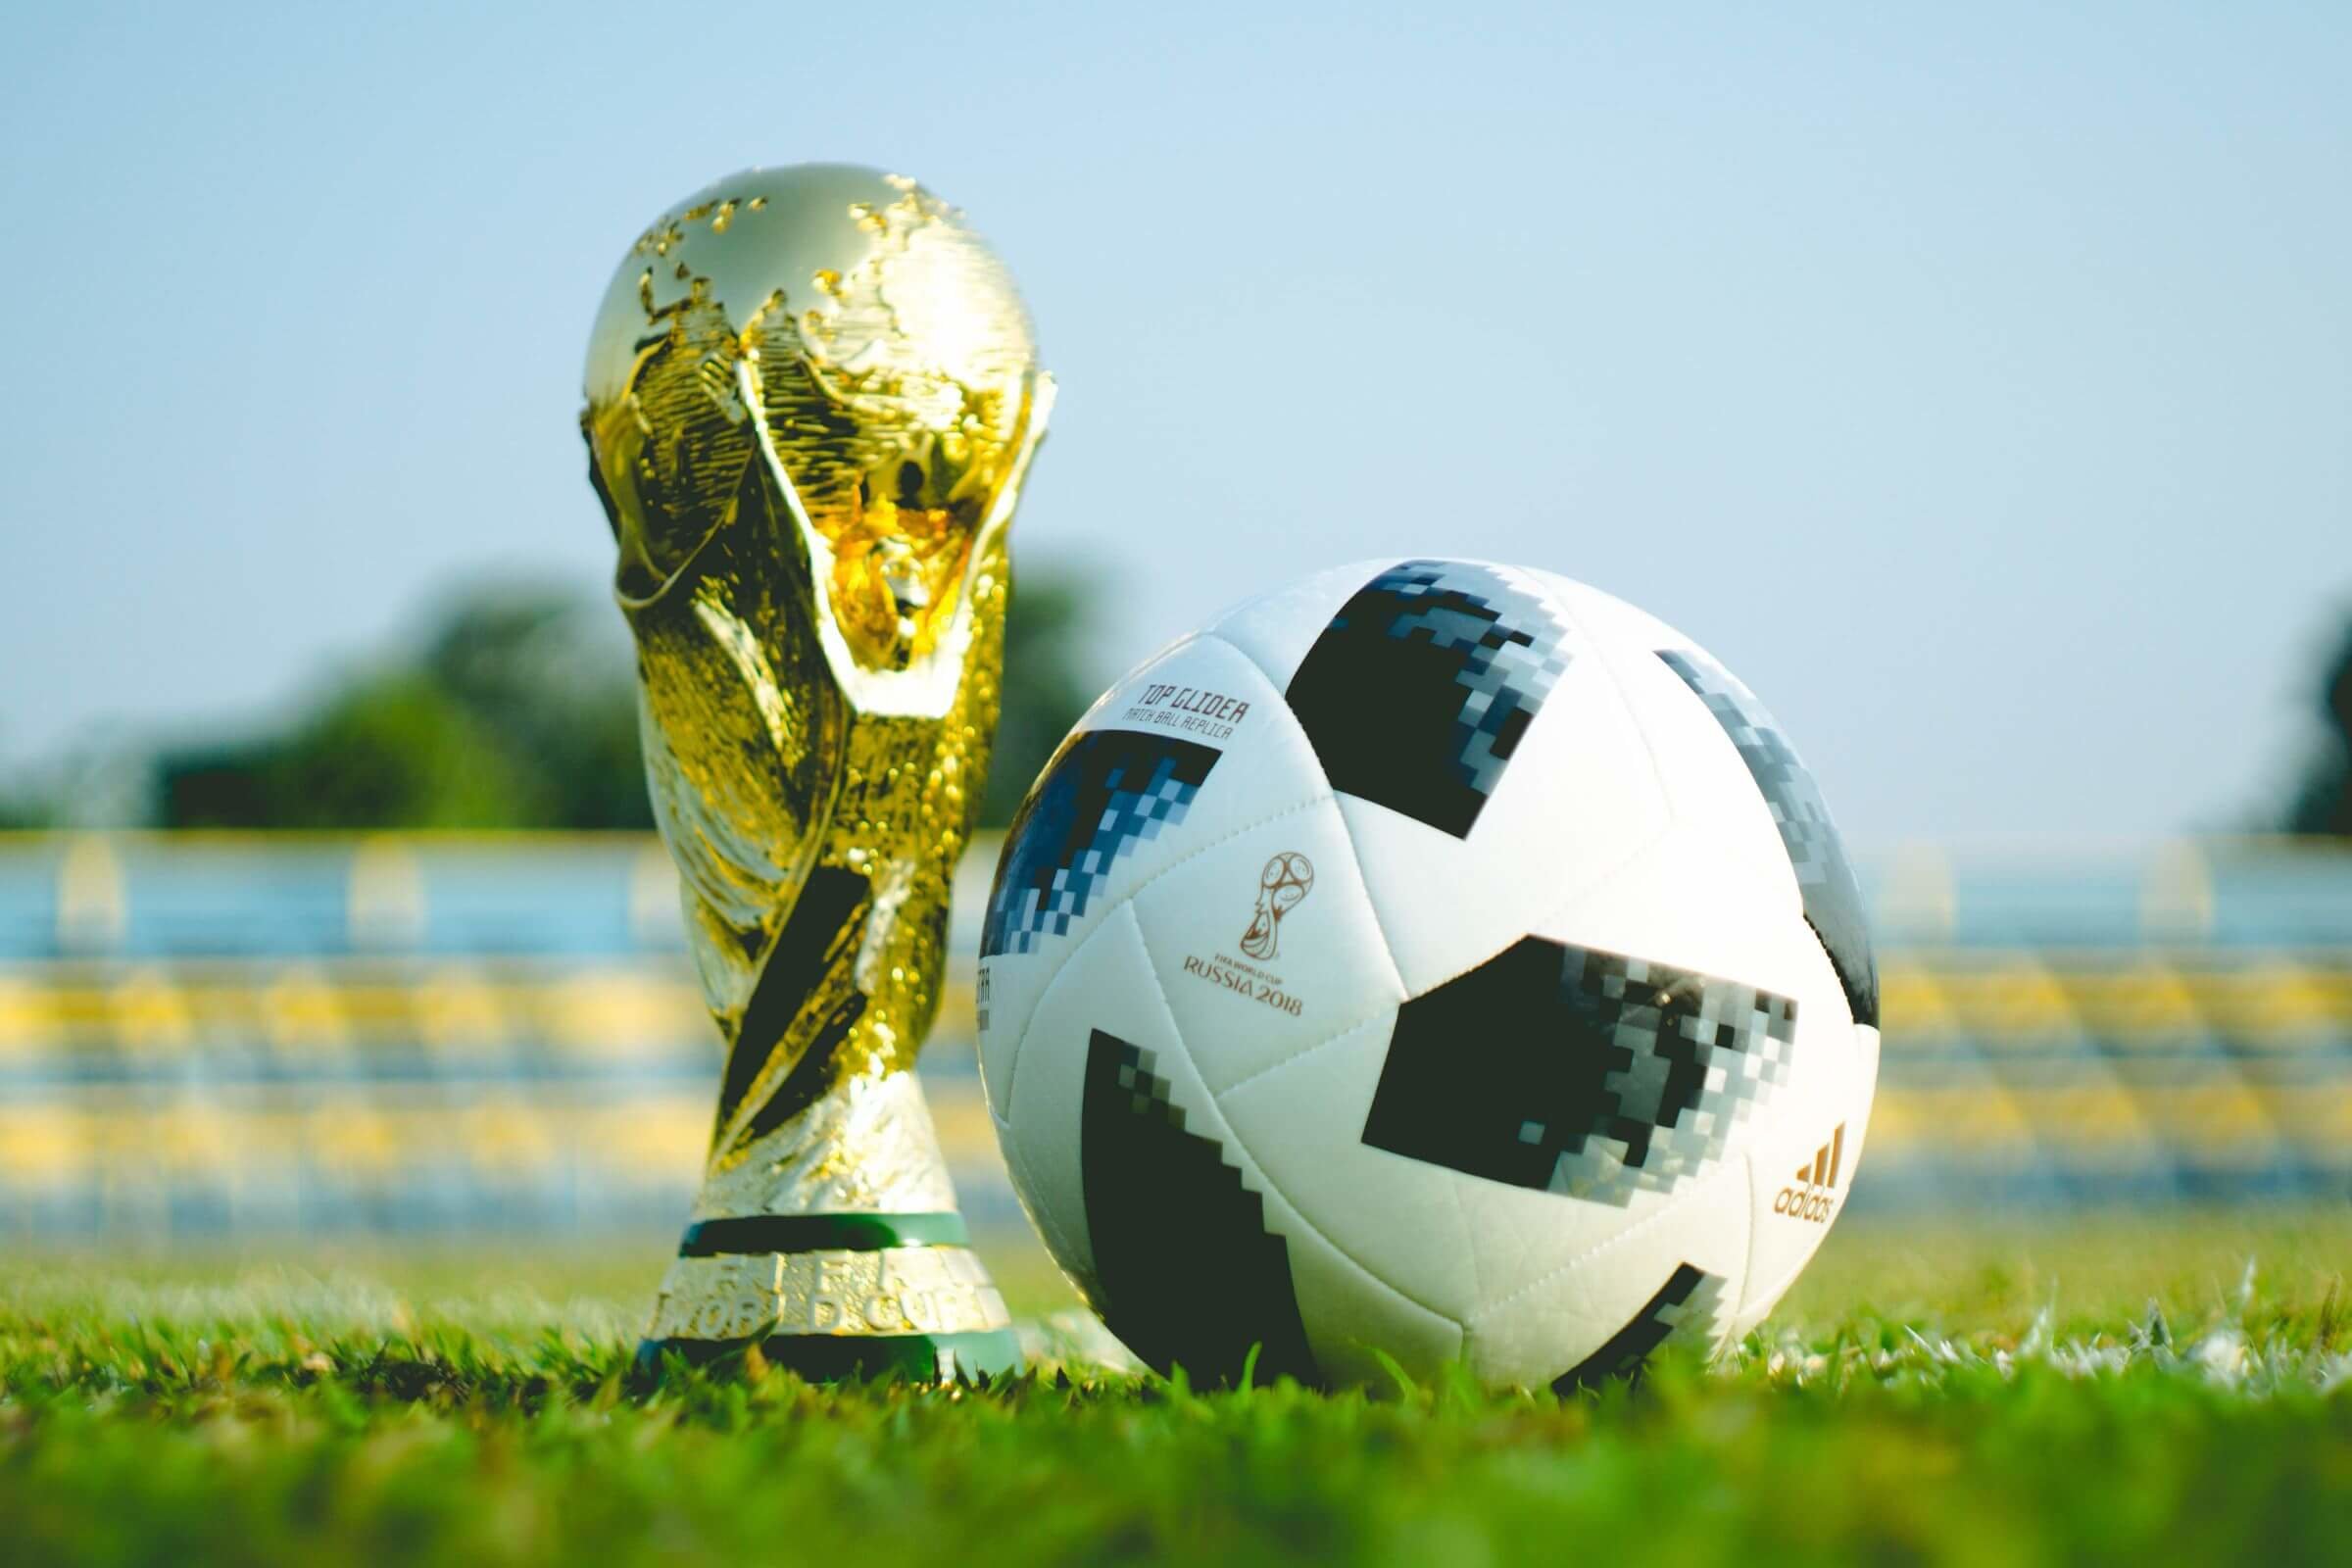 Qatar 2022 The ethical dilemma of watching the Fifa World Cup - Theos Think Tank